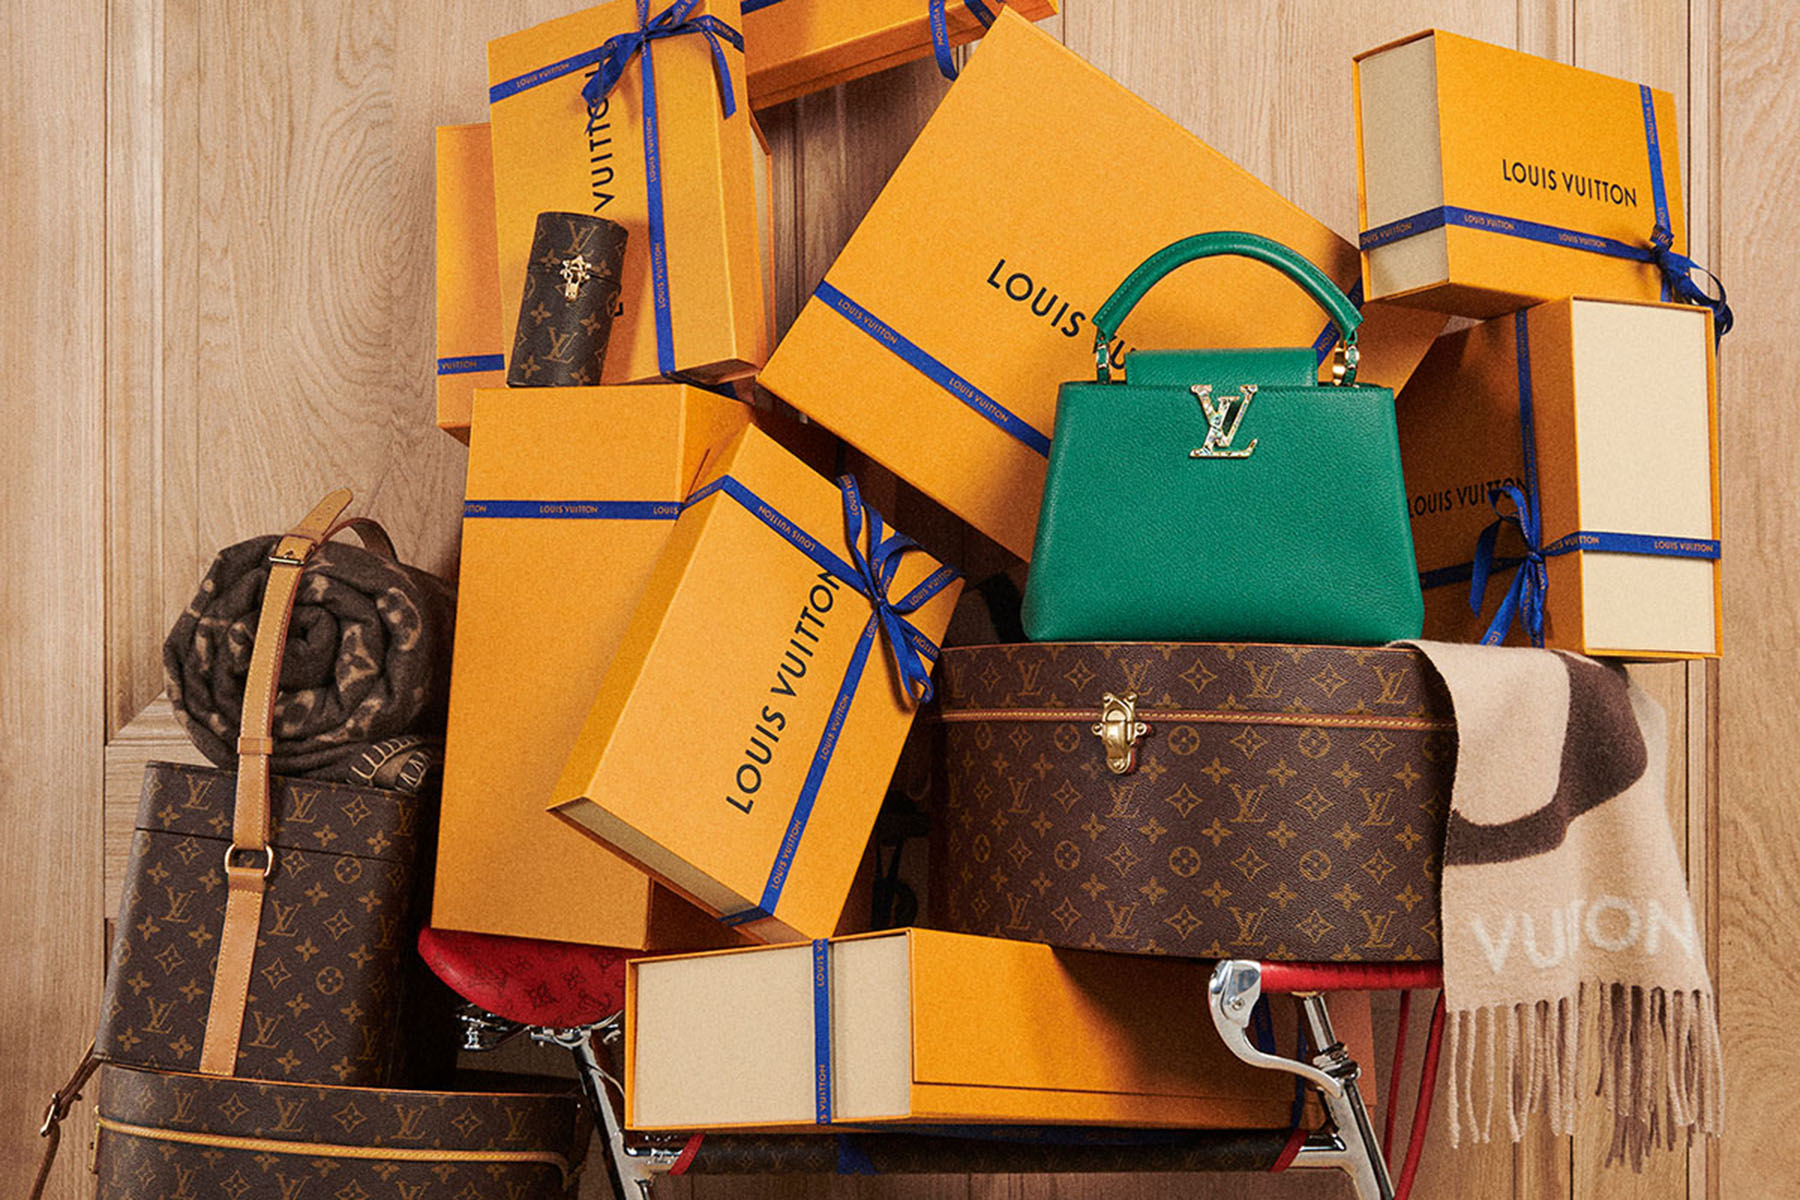 louis vuitton christmas gifts